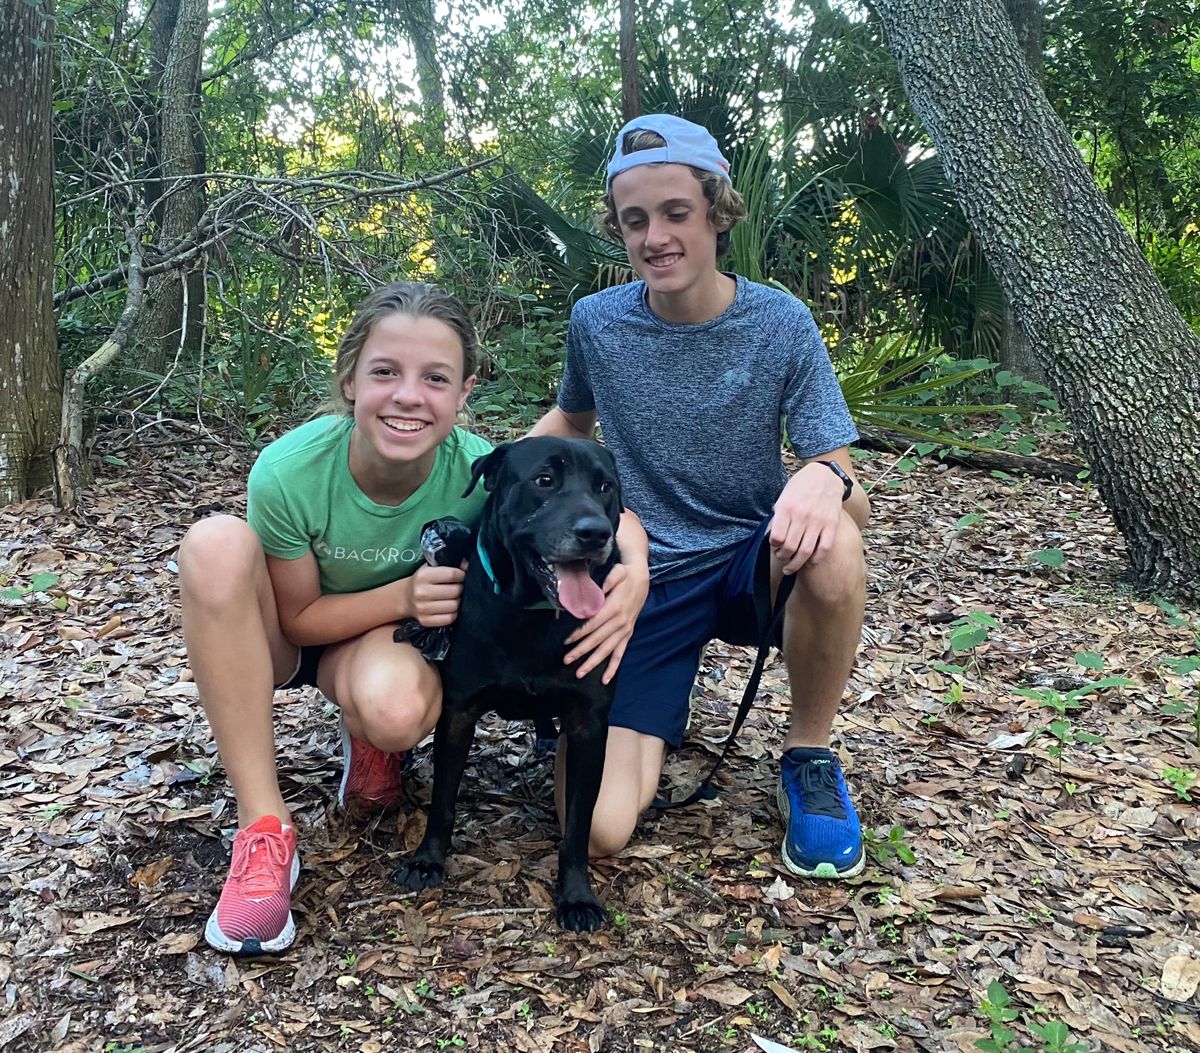 Siblings Blake Peifer, 14, and Brady Peifer, 17 – both students at Steinbrenner High School in Lutz, Fla. – with shelter dog Pantera during a run in June 2022.  (Courtesy of Margaret Peifer)